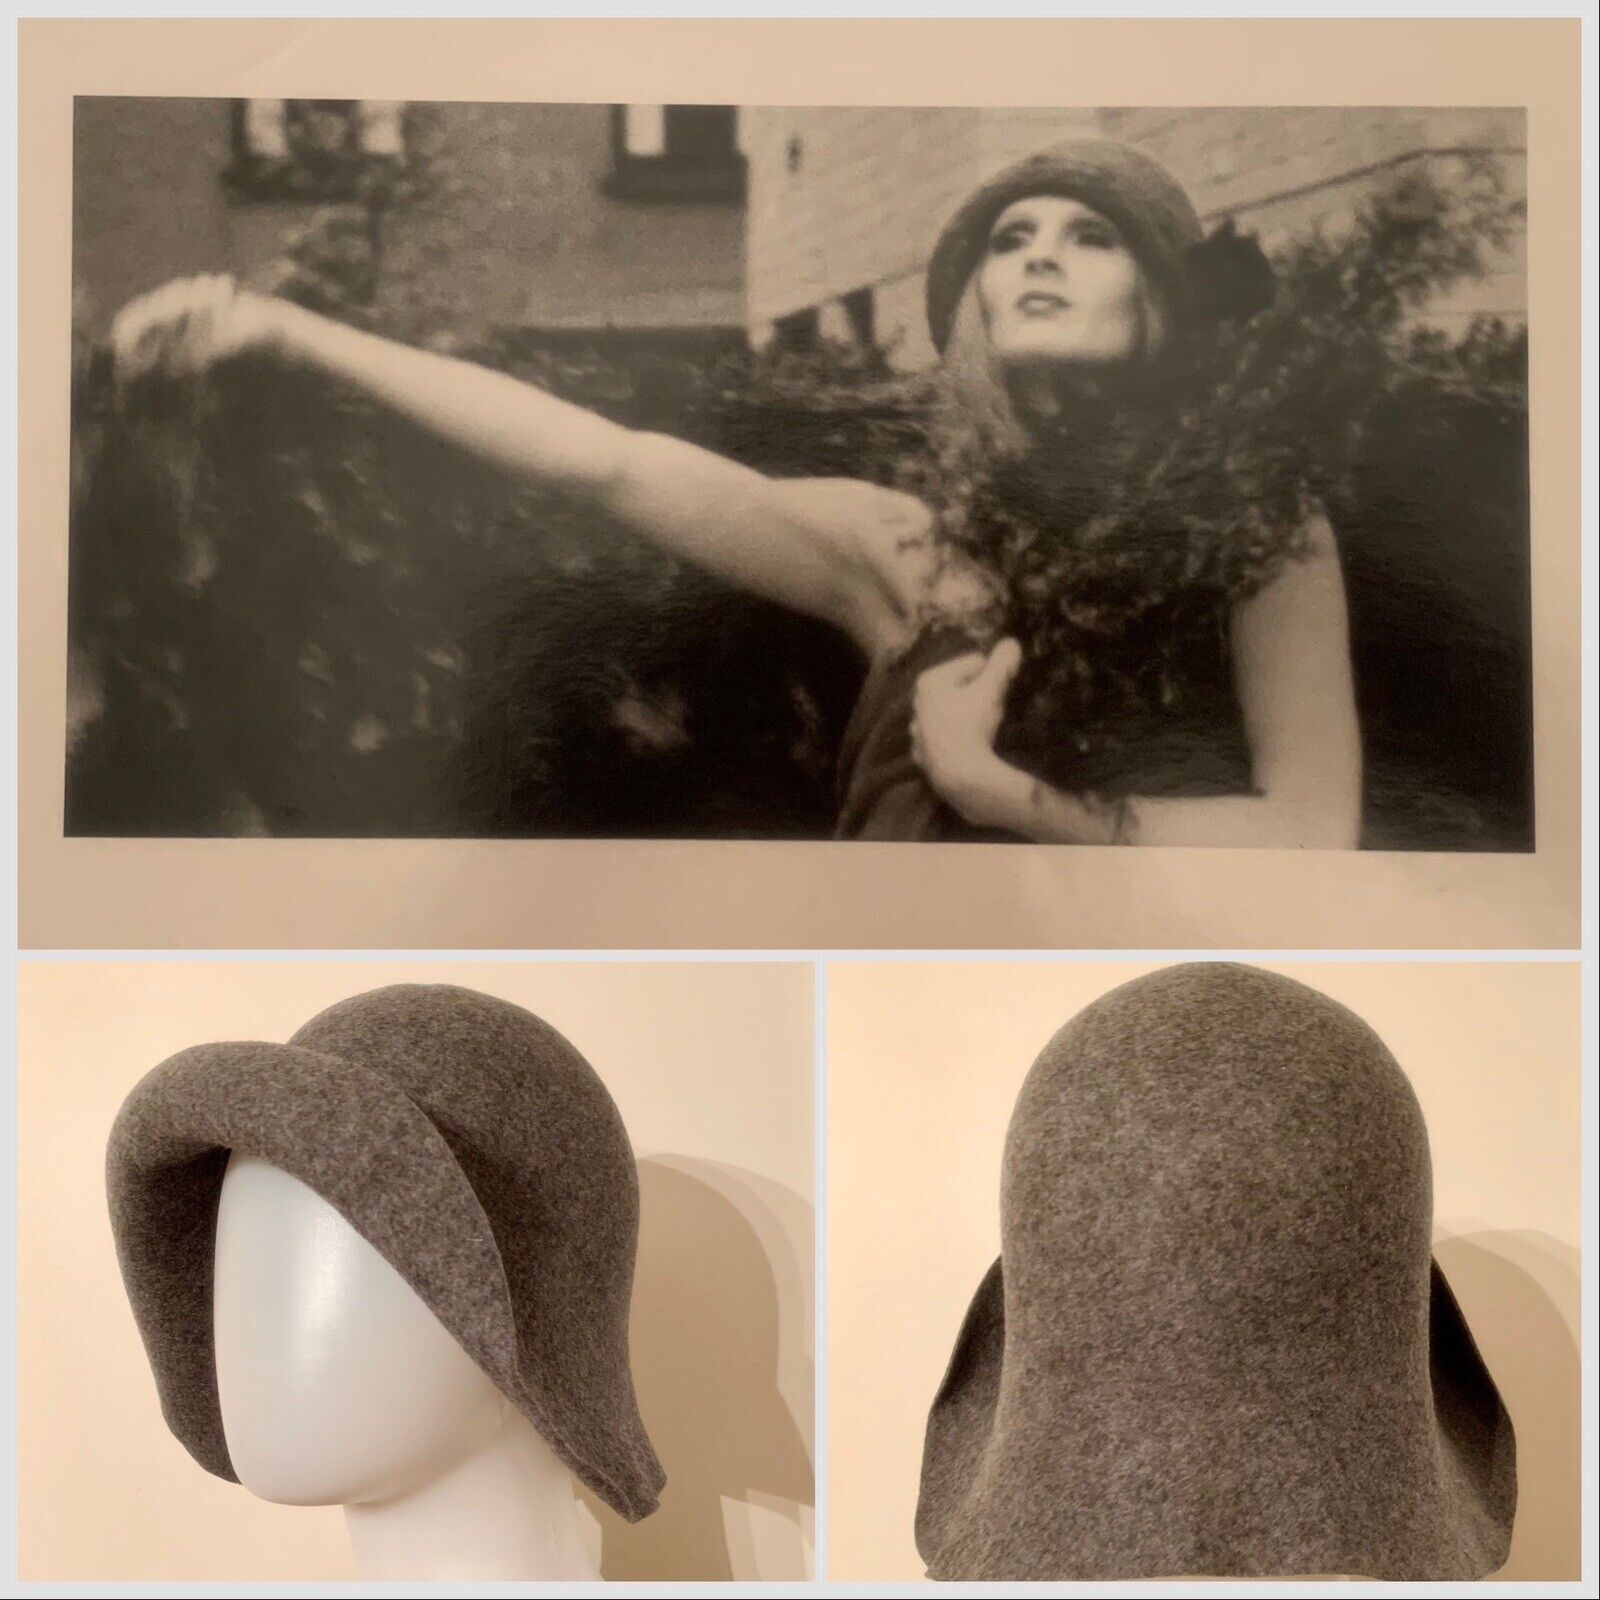 Candy Darling Original Photograph & Hat Worn In Photo Andy Warhol Superstar